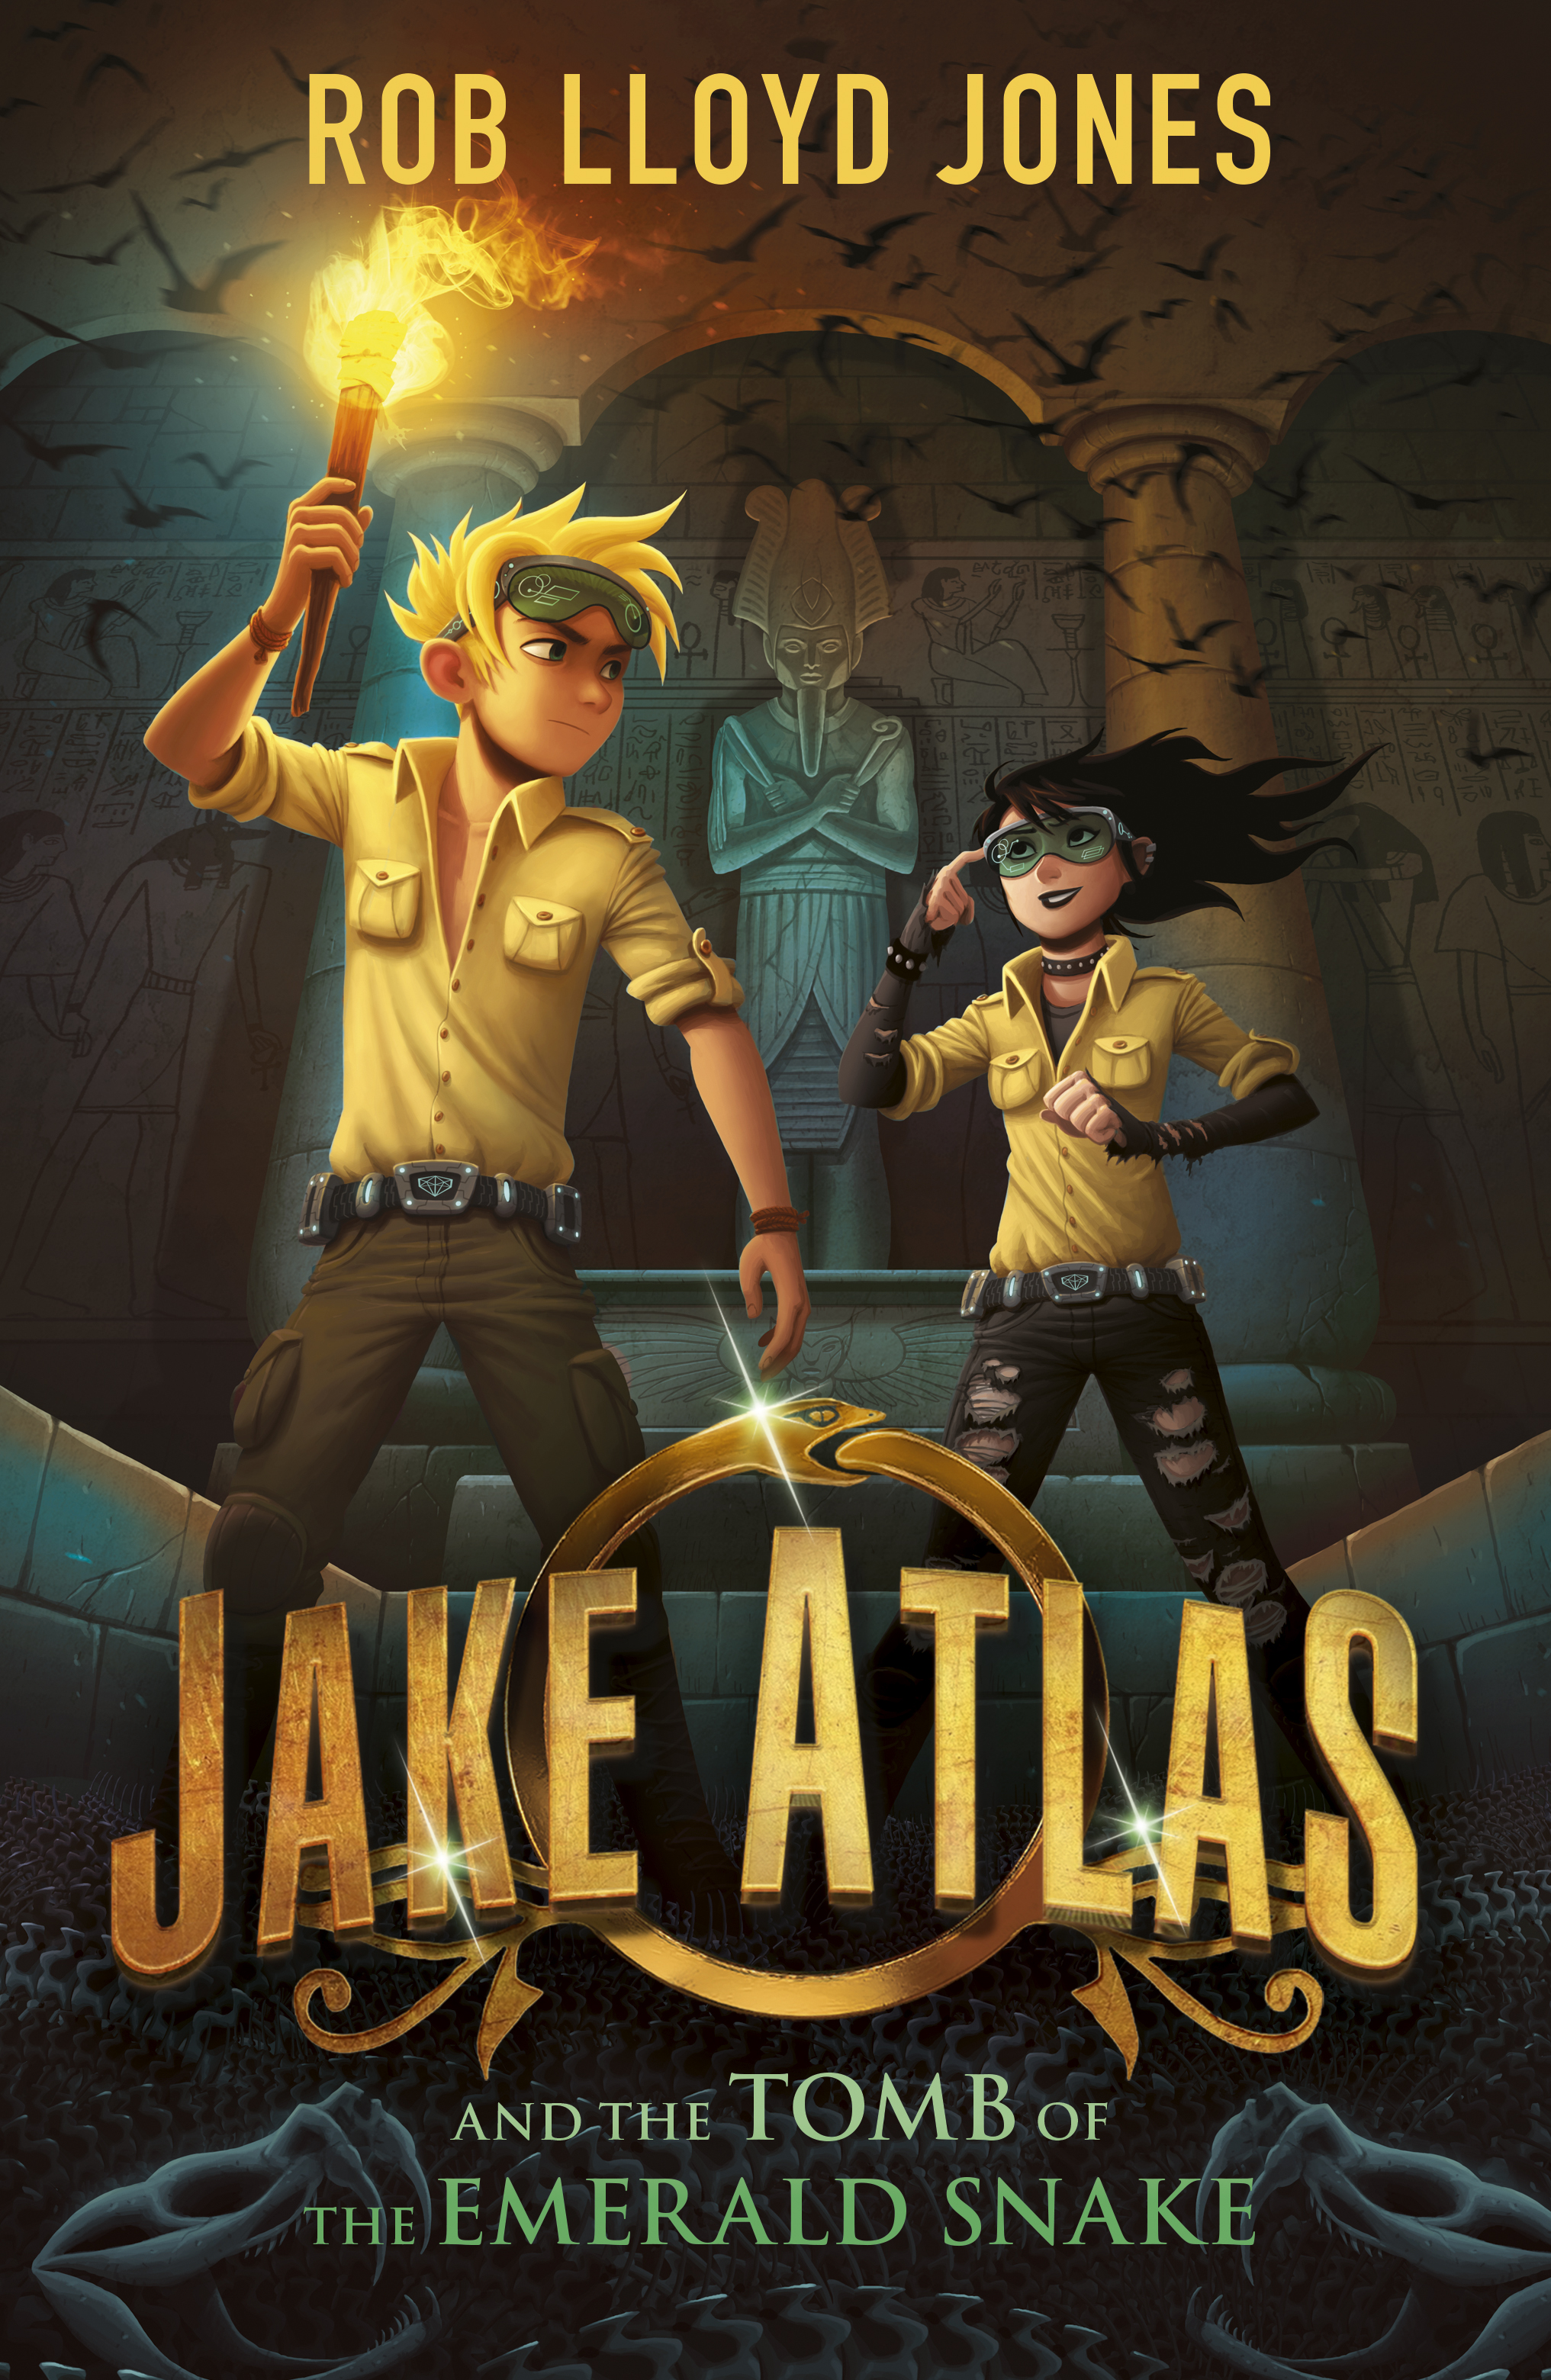 Jake-Atlas-and-the-Tomb-of-the-Emerald-Snake